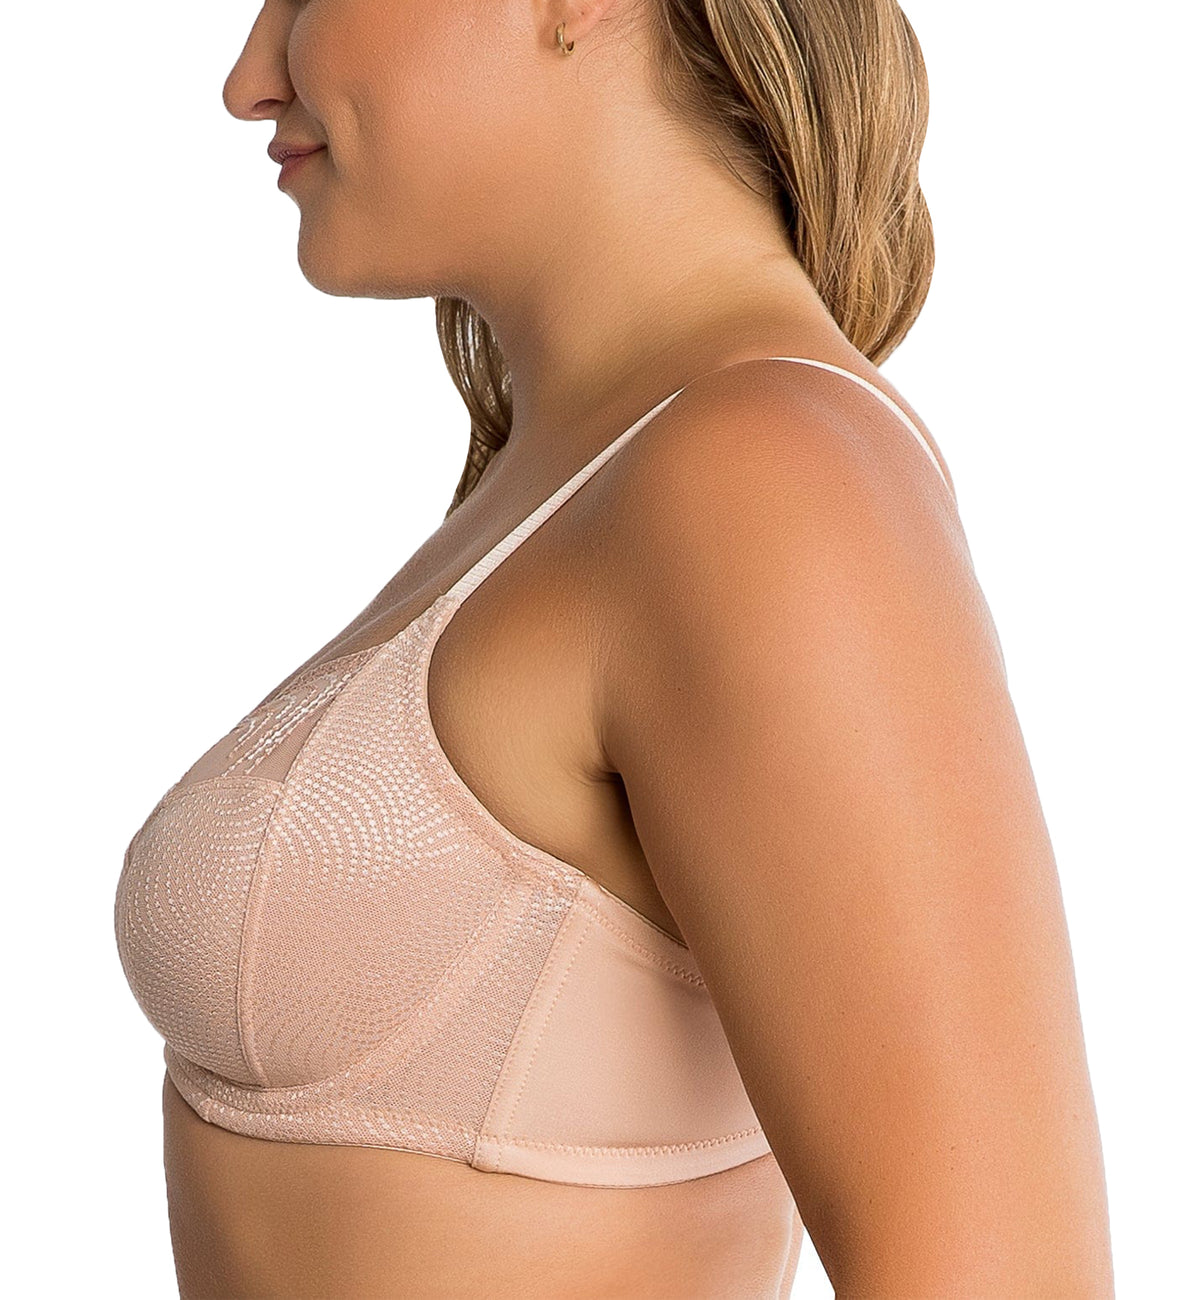 Parfait Pearl Unlined Side Support Underwire Bra (P60923),32D,Cameo Rose - Cameo Rose,32D